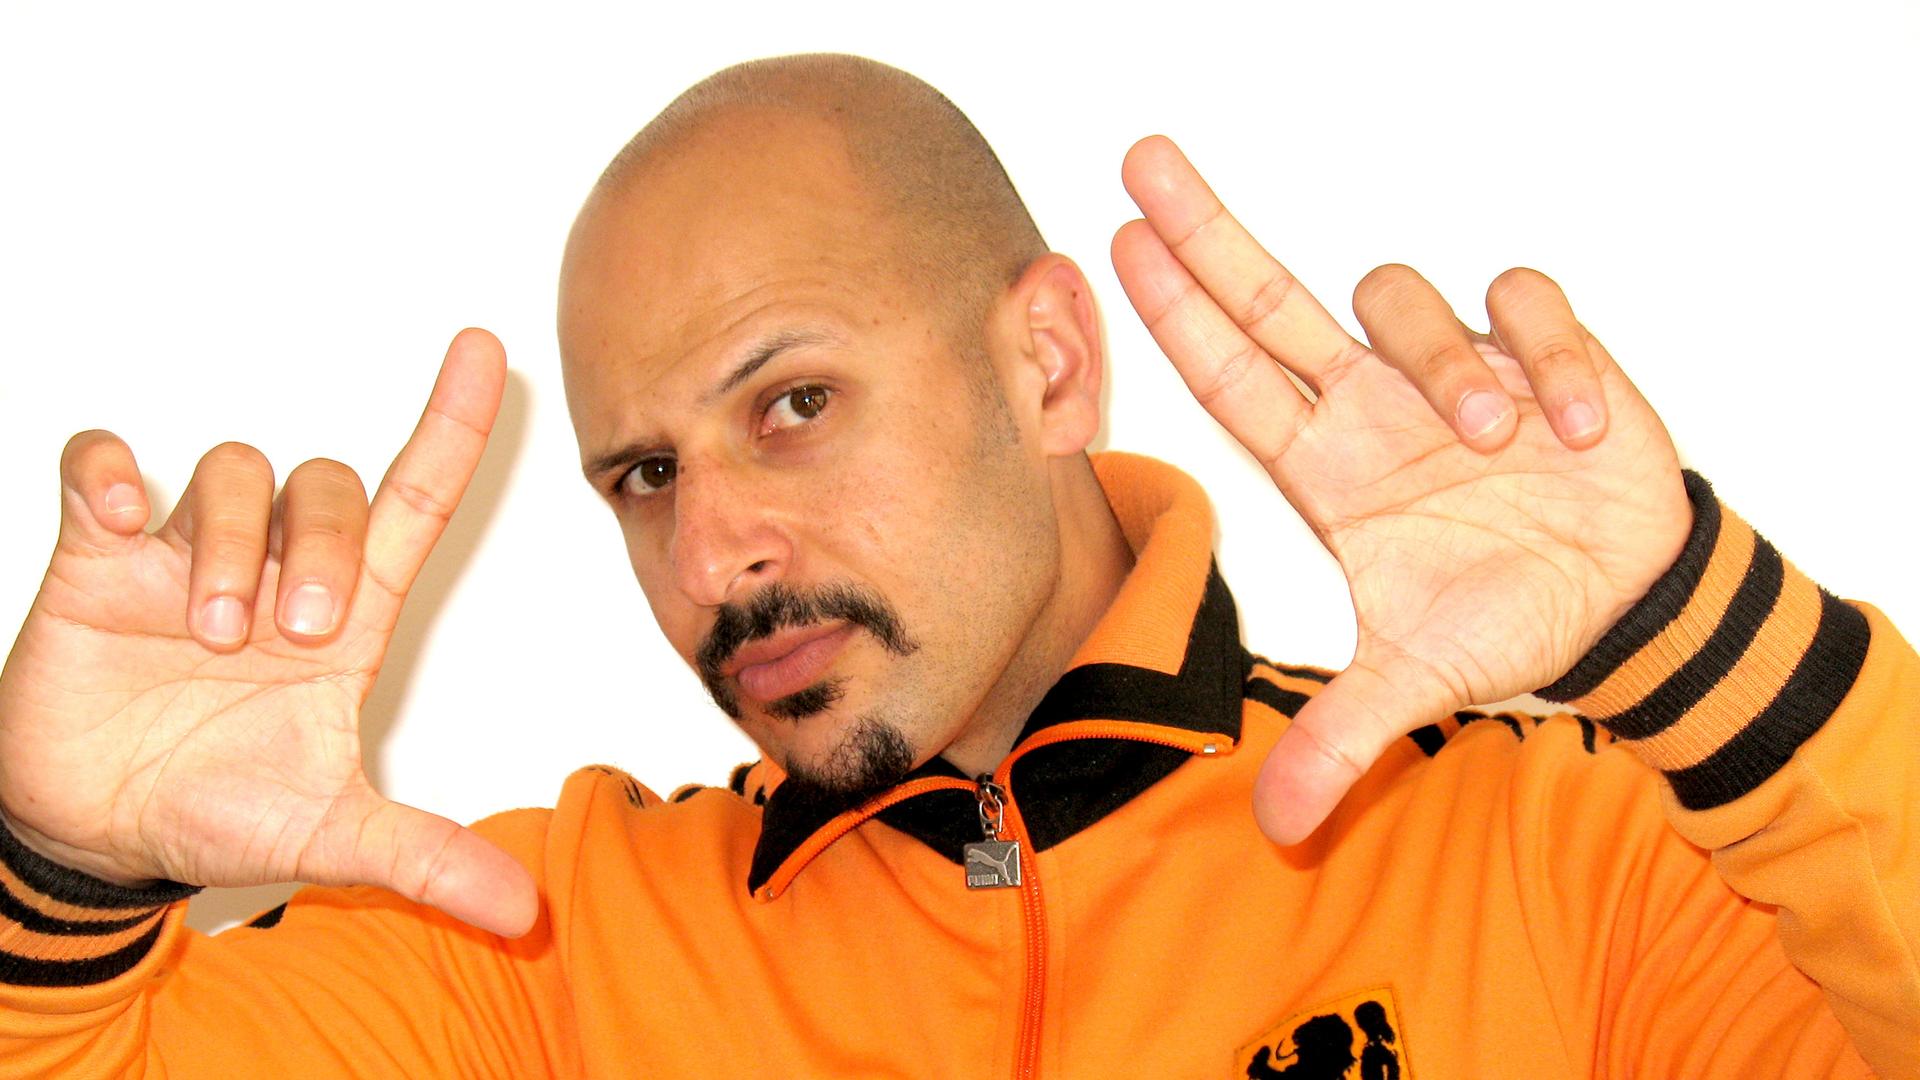 Comedian Maz Jobrani was born in Iran and grew up in Los Angeles. He says the attack on the satirical French publication Charlie Hebdo was an attack on all satirists.